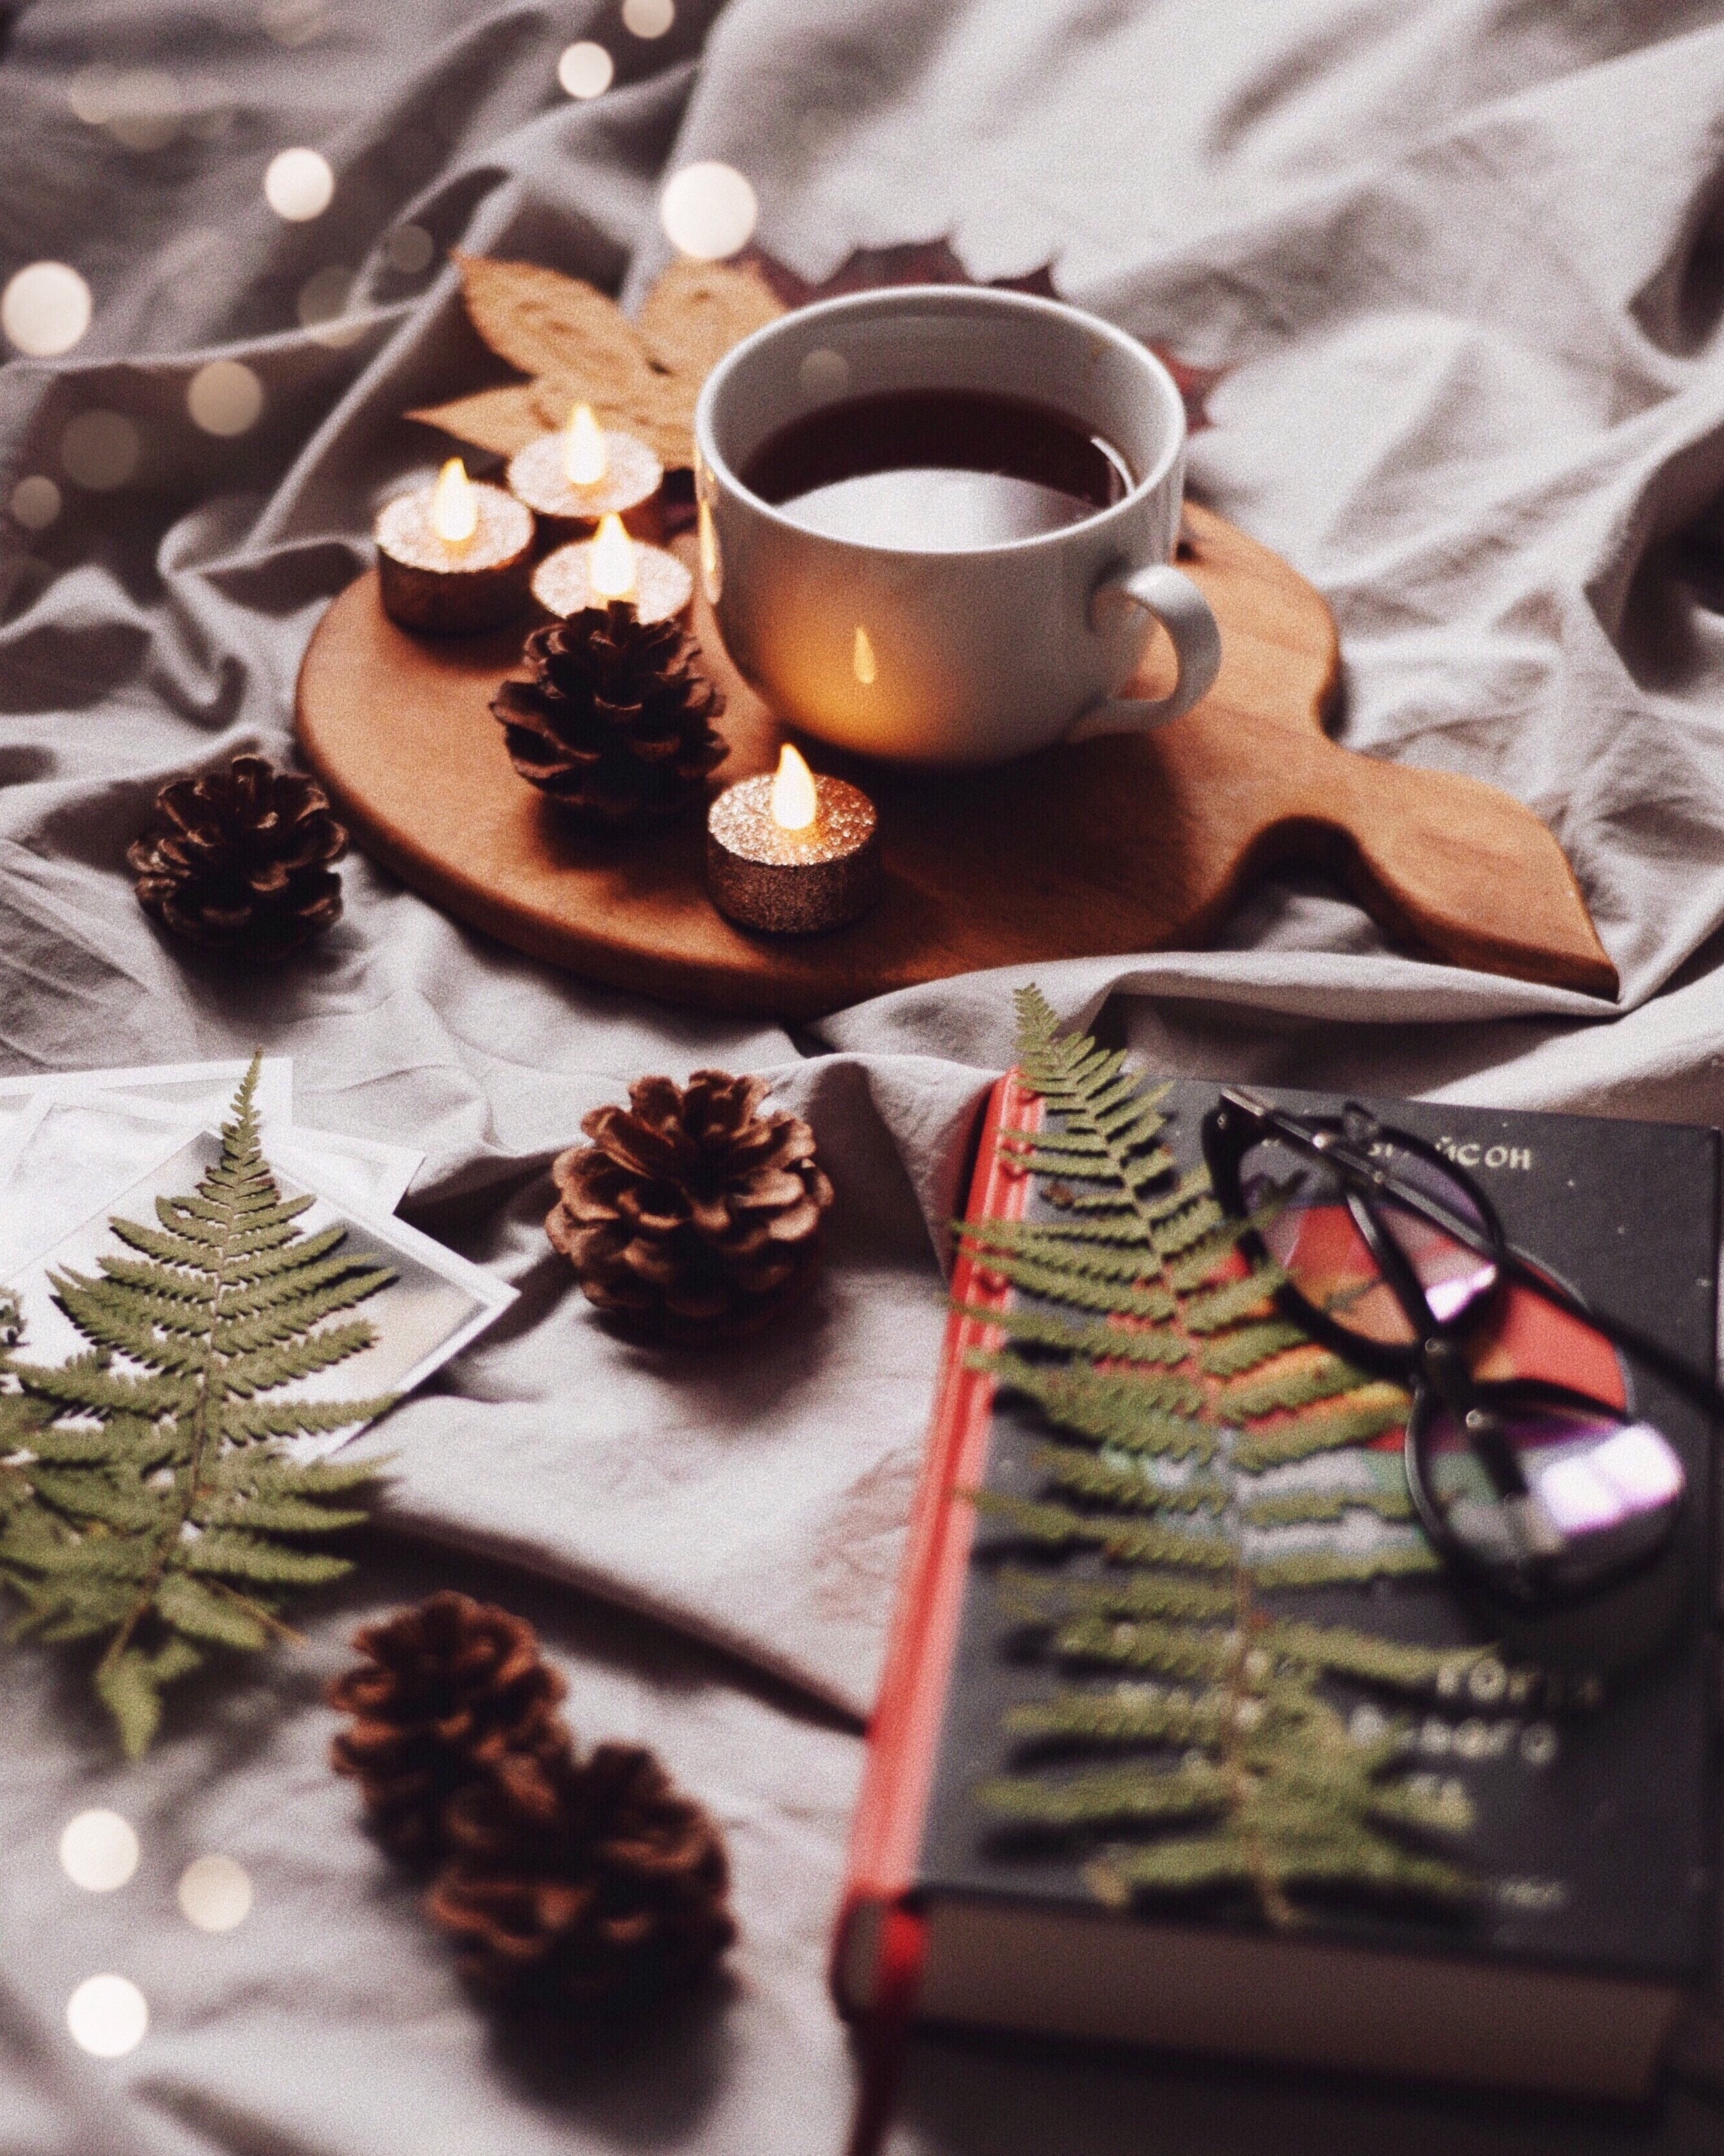 cones, candles, coffee, miscellanea, miscellaneous, cup, book, drink, beverage, coziness, comfort